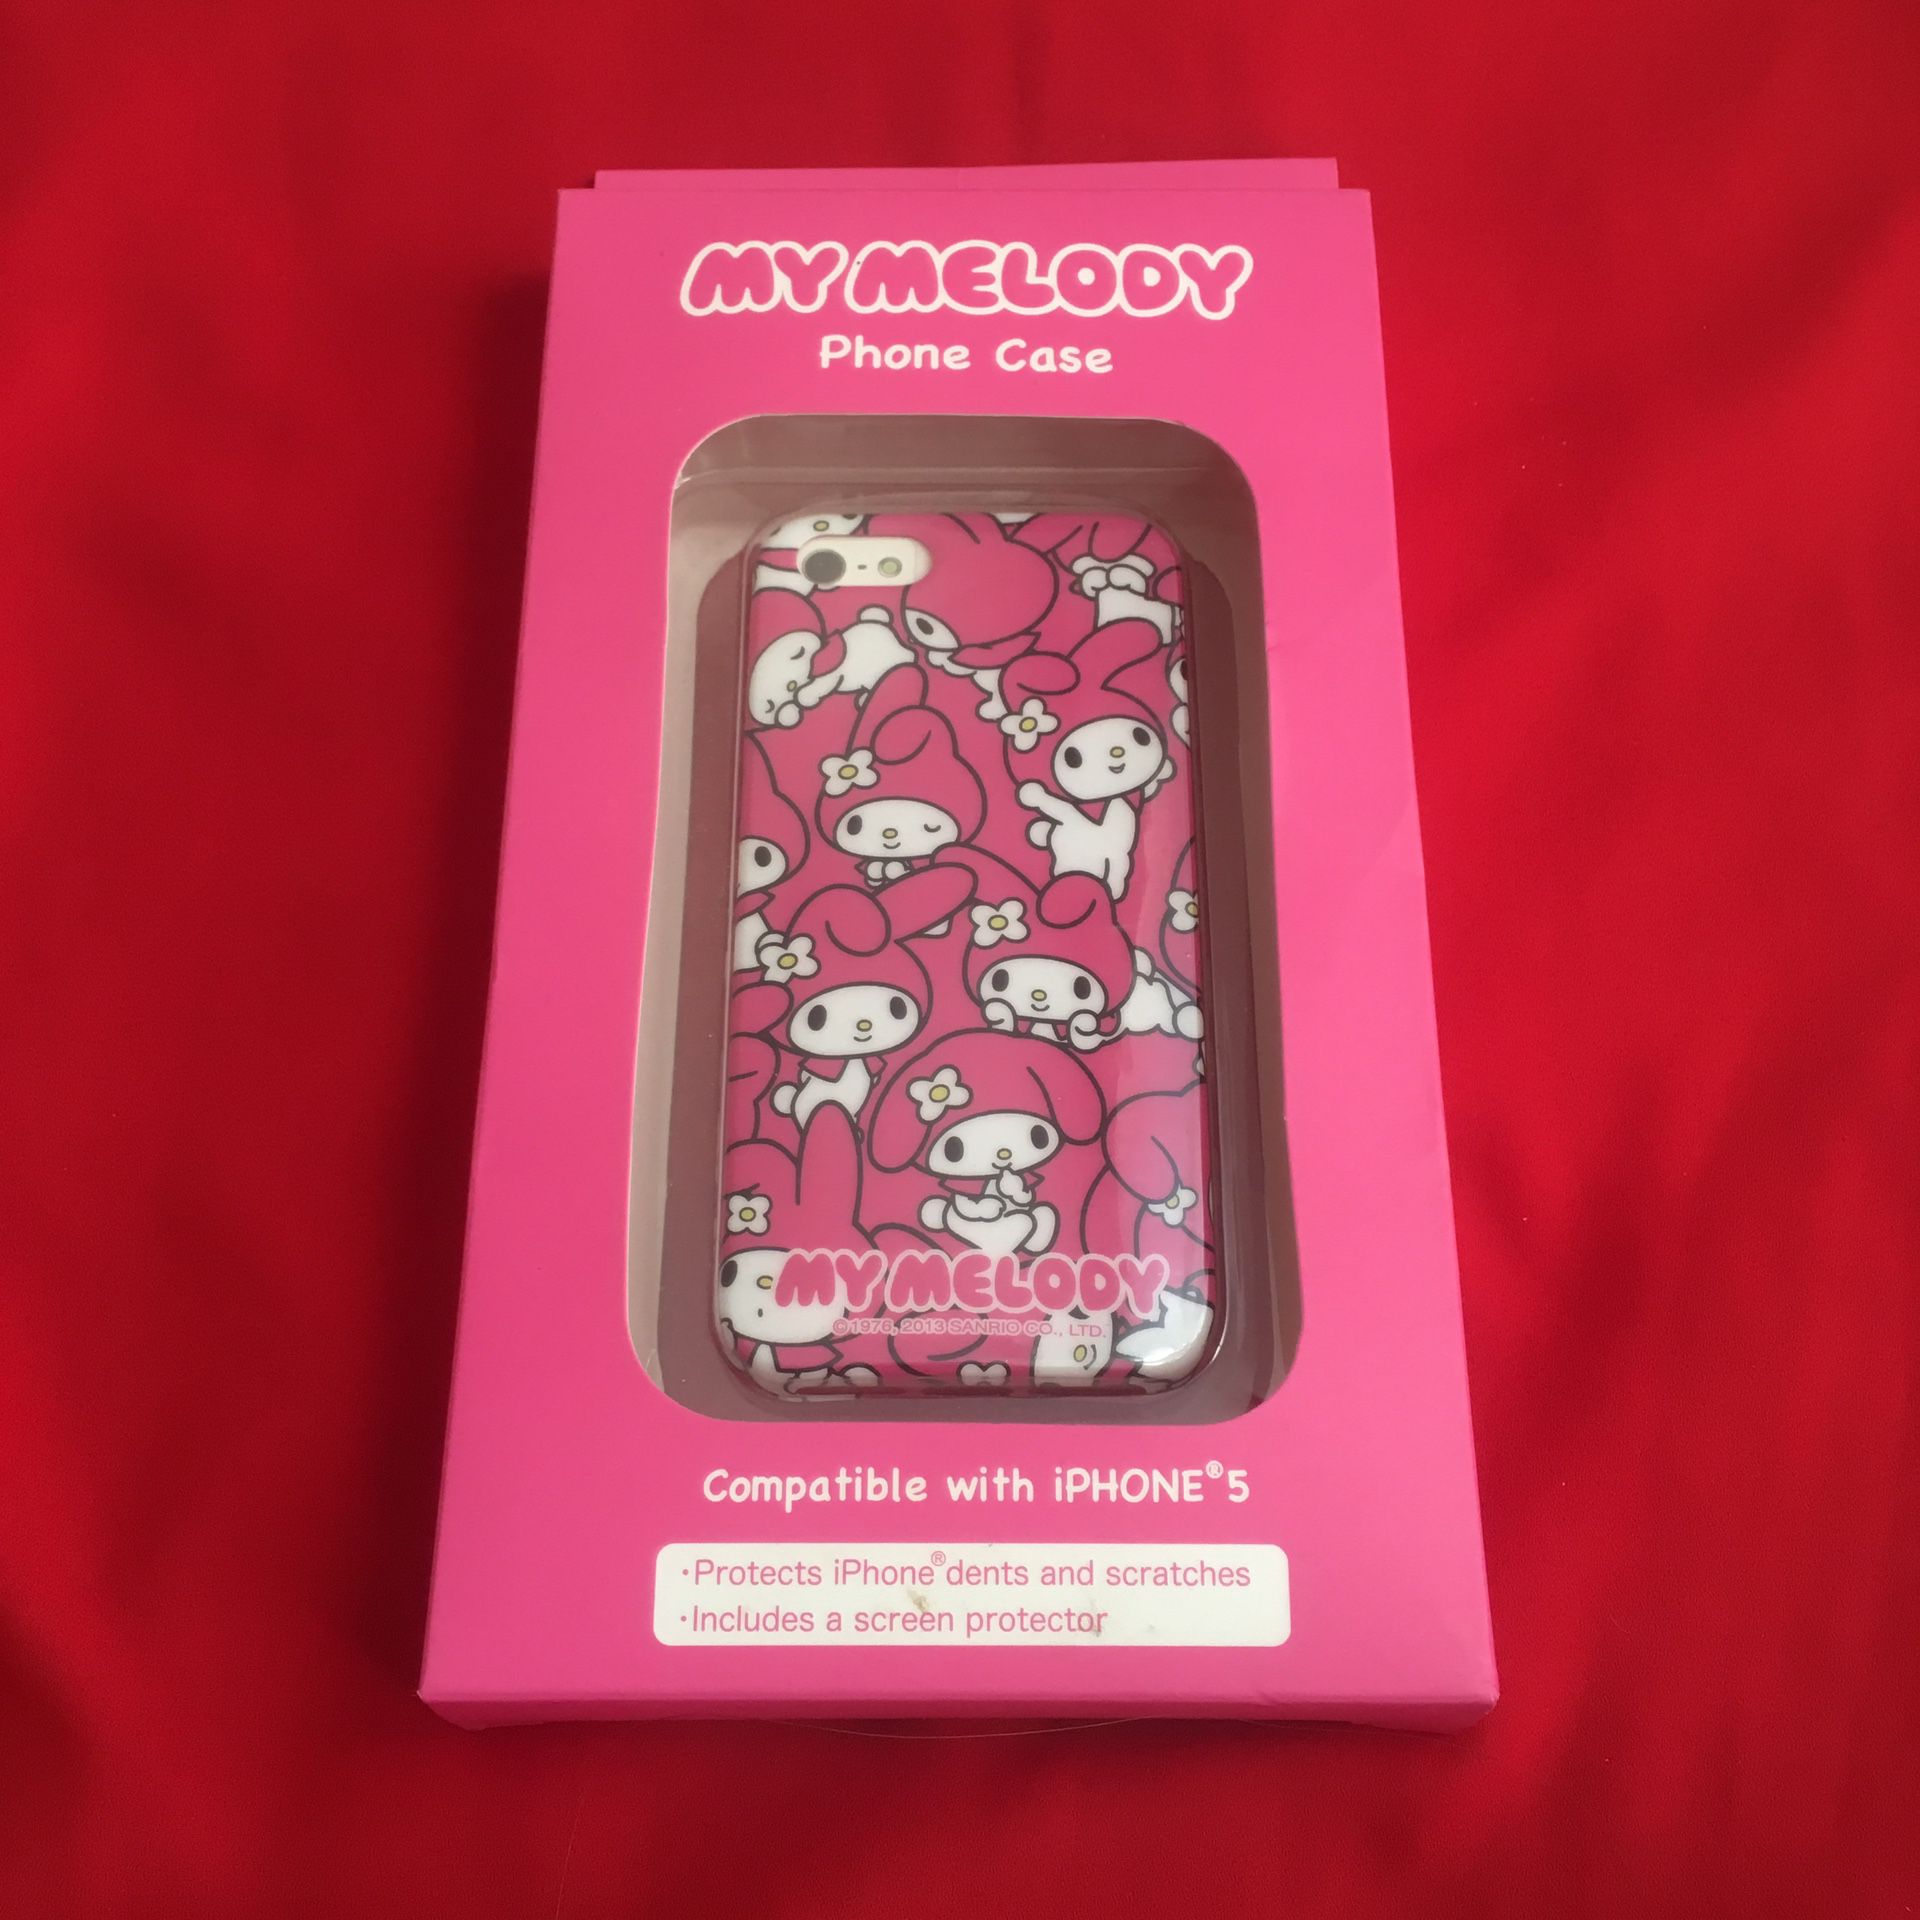 iPhone Sanrio Case Pink Bunny Tokidoki My Melody Protective Phone Defender Case iPhone 5 SE 5S 5C White Cat School Hello Kitty